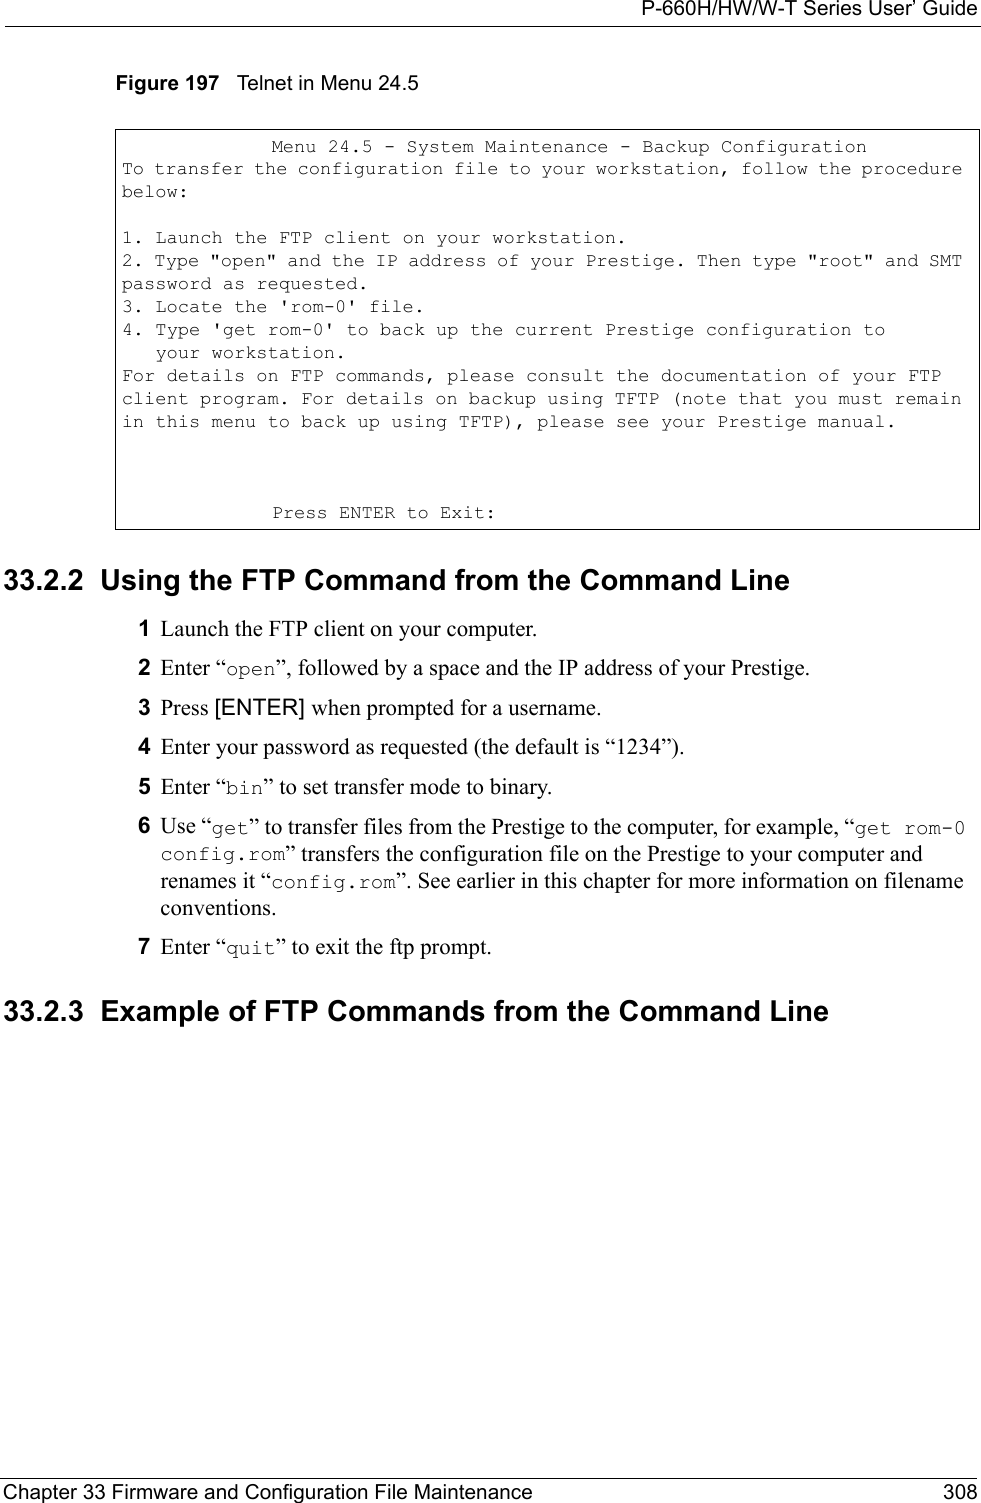 P-660H/HW/W-T Series User’ GuideChapter 33 Firmware and Configuration File Maintenance 308Figure 197   Telnet in Menu 24.533.2.2  Using the FTP Command from the Command Line1Launch the FTP client on your computer.2Enter “open”, followed by a space and the IP address of your Prestige. 3Press [ENTER] when prompted for a username.4Enter your password as requested (the default is “1234”).5Enter “bin” to set transfer mode to binary.6Use “get” to transfer files from the Prestige to the computer, for example, “get rom-0 config.rom” transfers the configuration file on the Prestige to your computer and renames it “config.rom”. See earlier in this chapter for more information on filename conventions.7Enter “quit” to exit the ftp prompt. 33.2.3  Example of FTP Commands from the Command Line Menu 24.5 - System Maintenance - Backup ConfigurationTo transfer the configuration file to your workstation, follow the procedure below:1. Launch the FTP client on your workstation.2. Type &quot;open&quot; and the IP address of your Prestige. Then type &quot;root&quot; and SMT password as requested.3. Locate the &apos;rom-0&apos; file.4. Type &apos;get rom-0&apos; to back up the current Prestige configuration to   your workstation.For details on FTP commands, please consult the documentation of your FTP client program. For details on backup using TFTP (note that you must remain in this menu to back up using TFTP), please see your Prestige manual.Press ENTER to Exit: